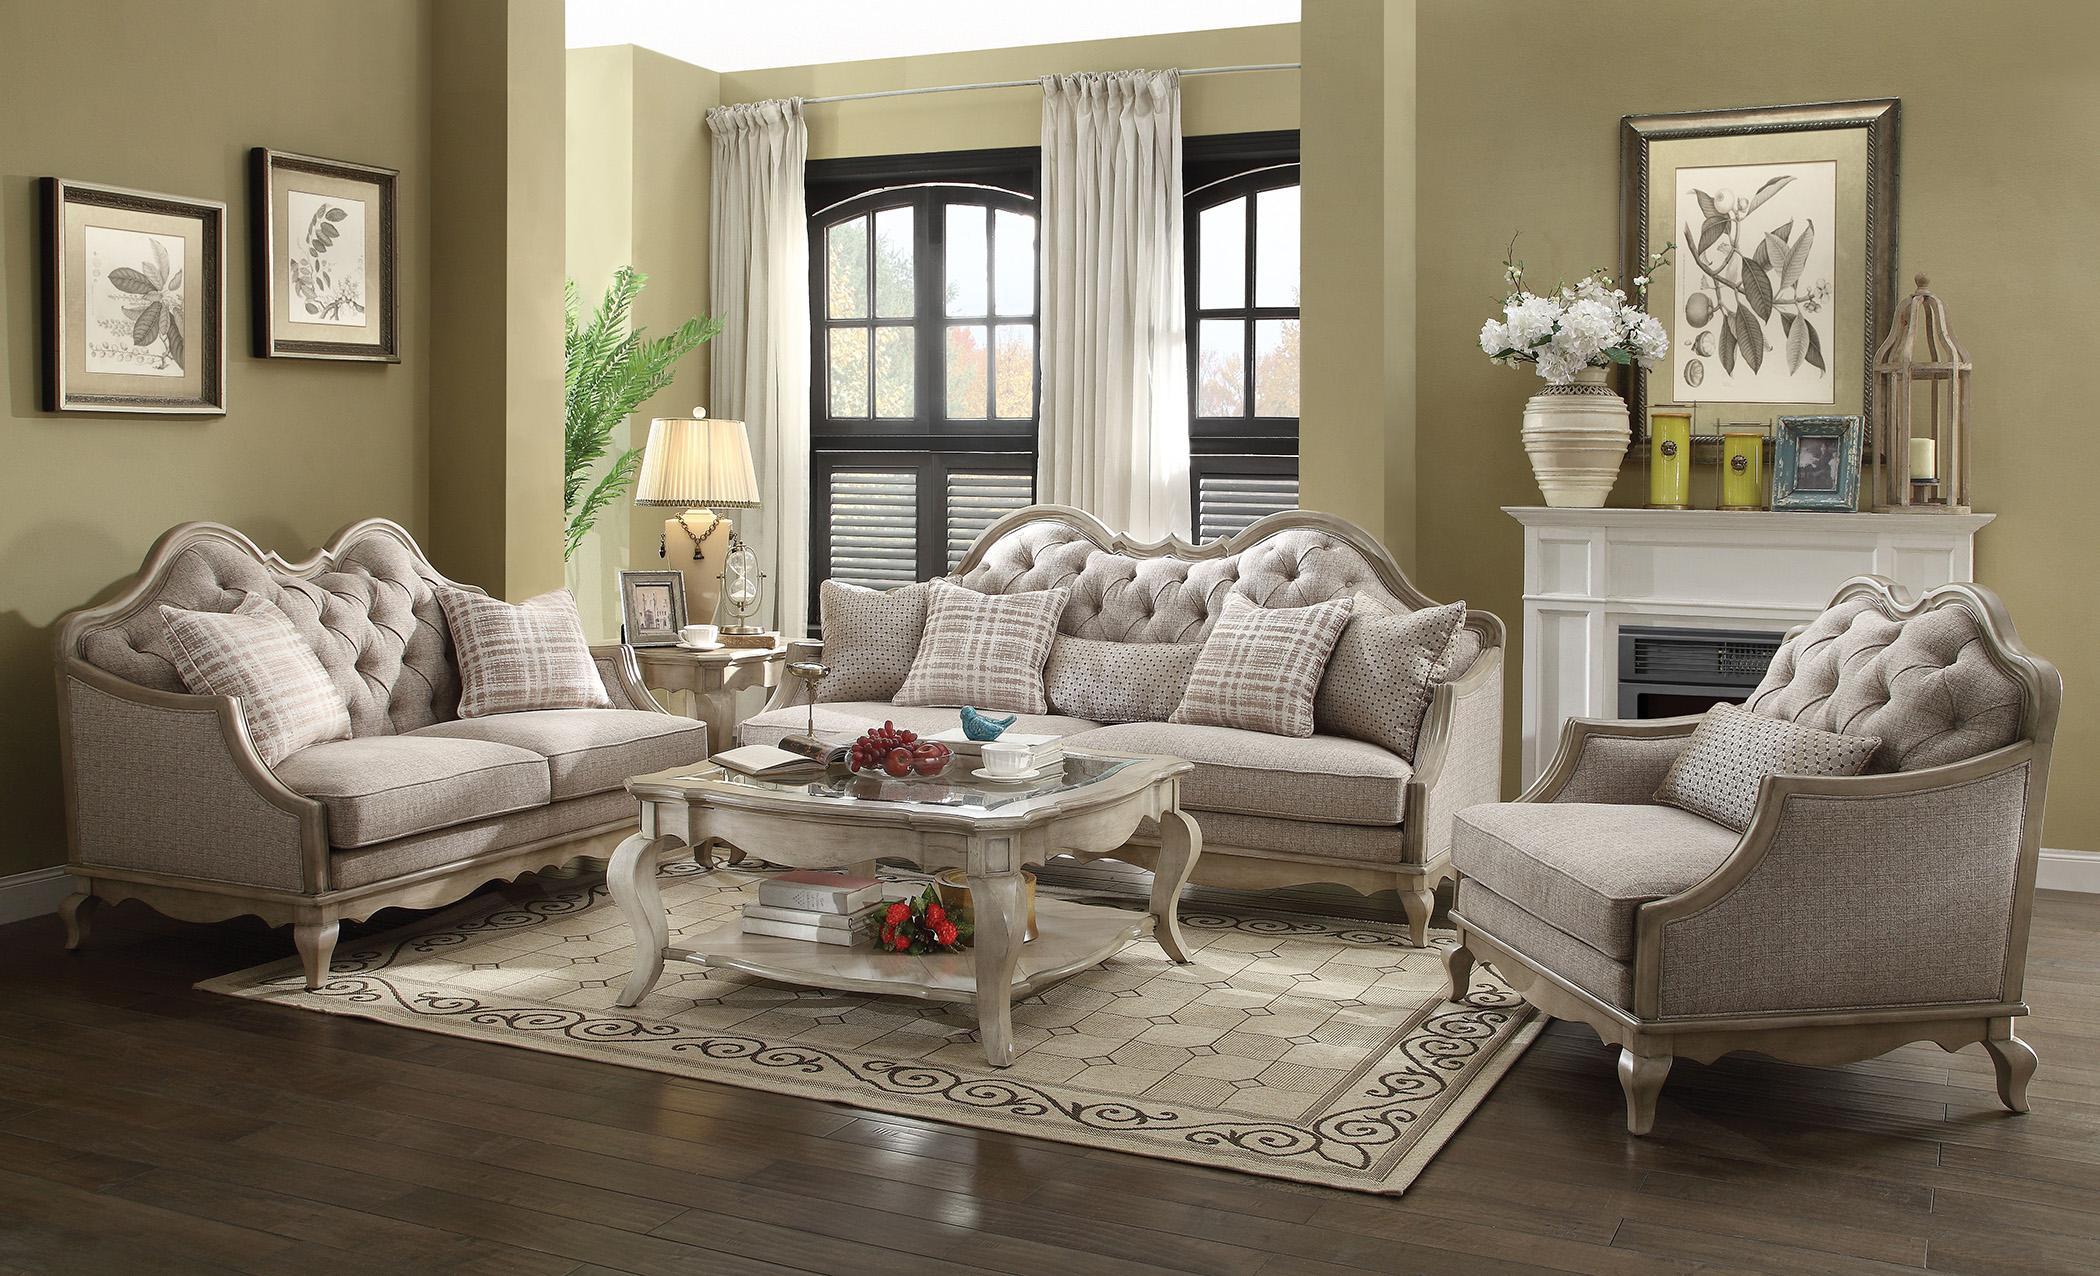 

        
Acme Furniture Chelmsford-56051 Loveseat Taupe/Beige Fabric 0840412074493
